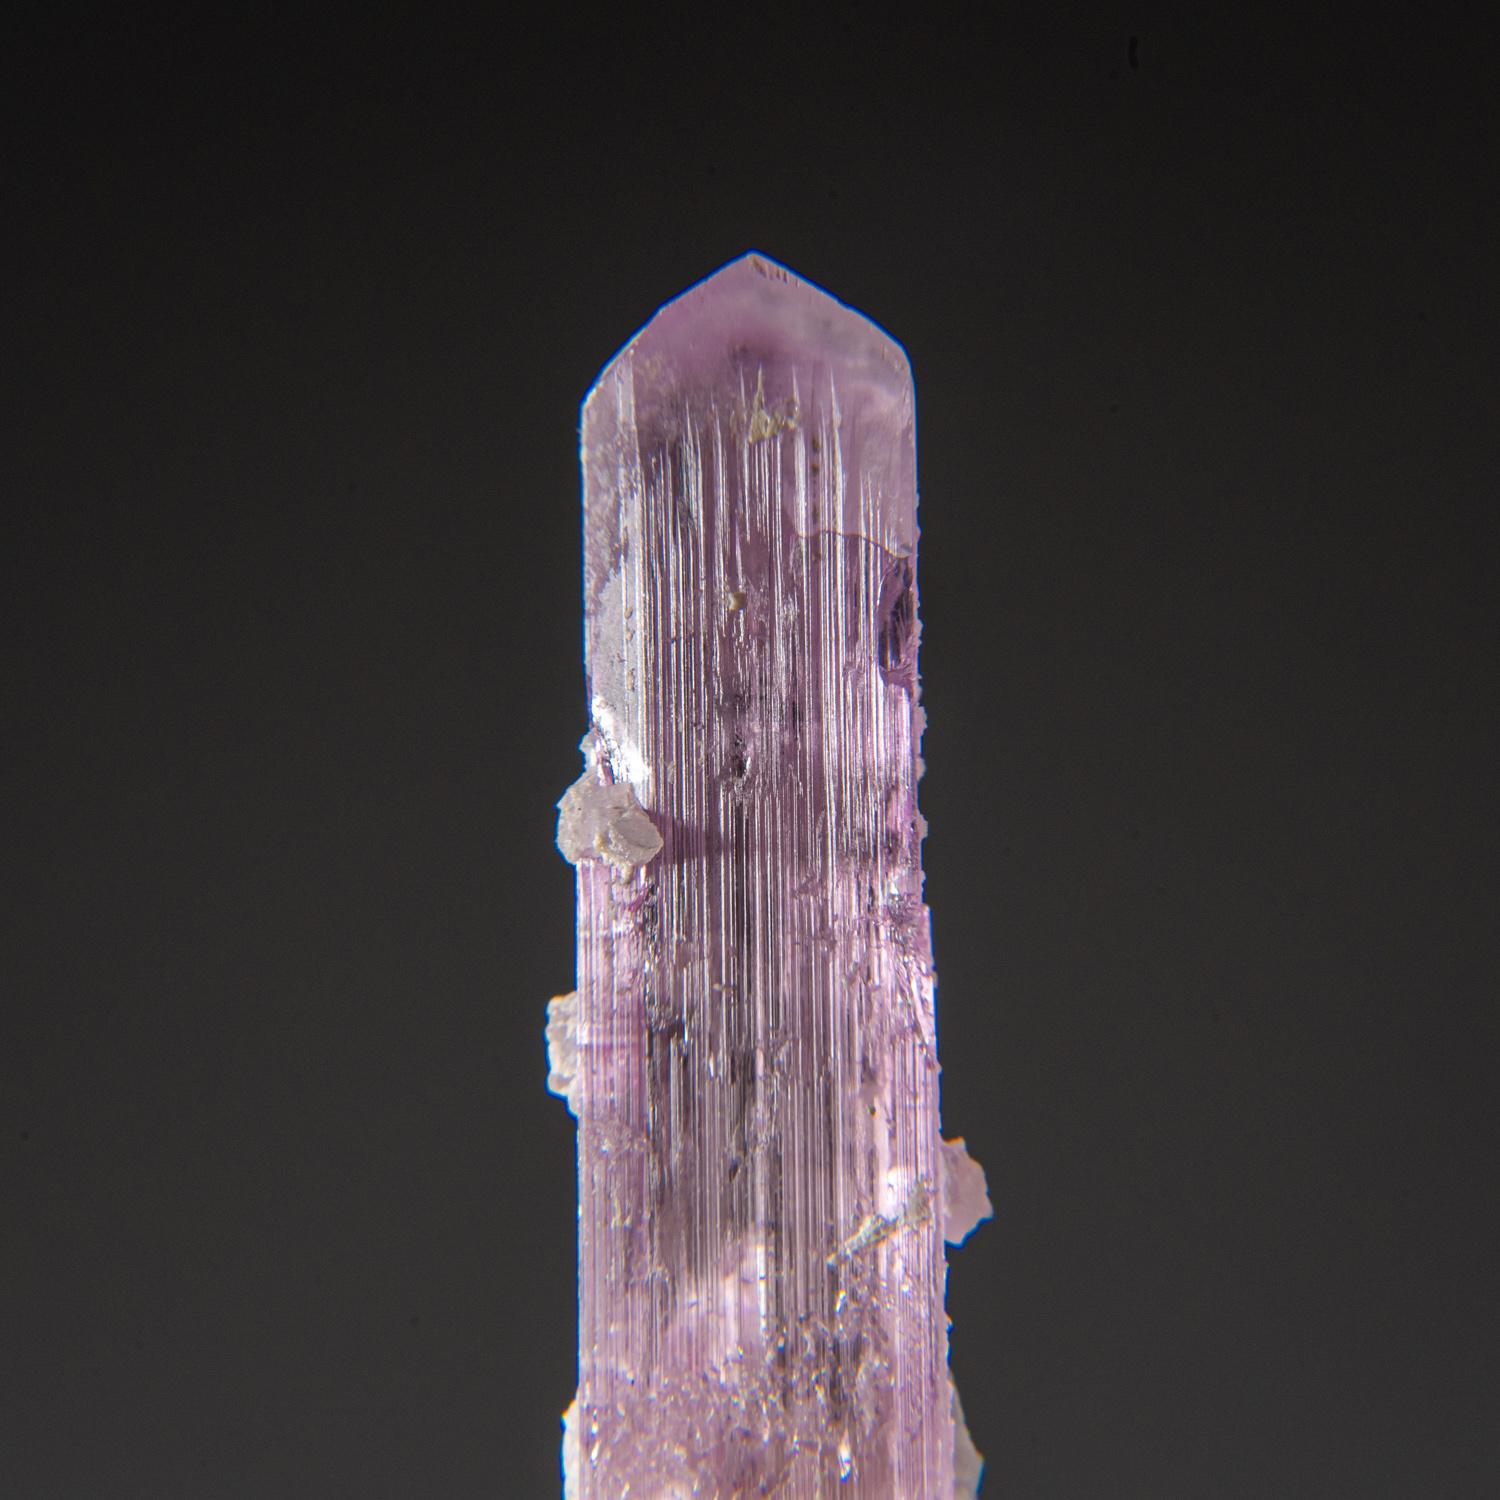 Doubly-terminated single crystal of transparent pink kunzite, the pink gem-grade variety of spodumene, with chisel-shaped termination and striated prism faces. The kunzite crystal is internally flawless.

Kunzite is a beautiful crystal, pure in